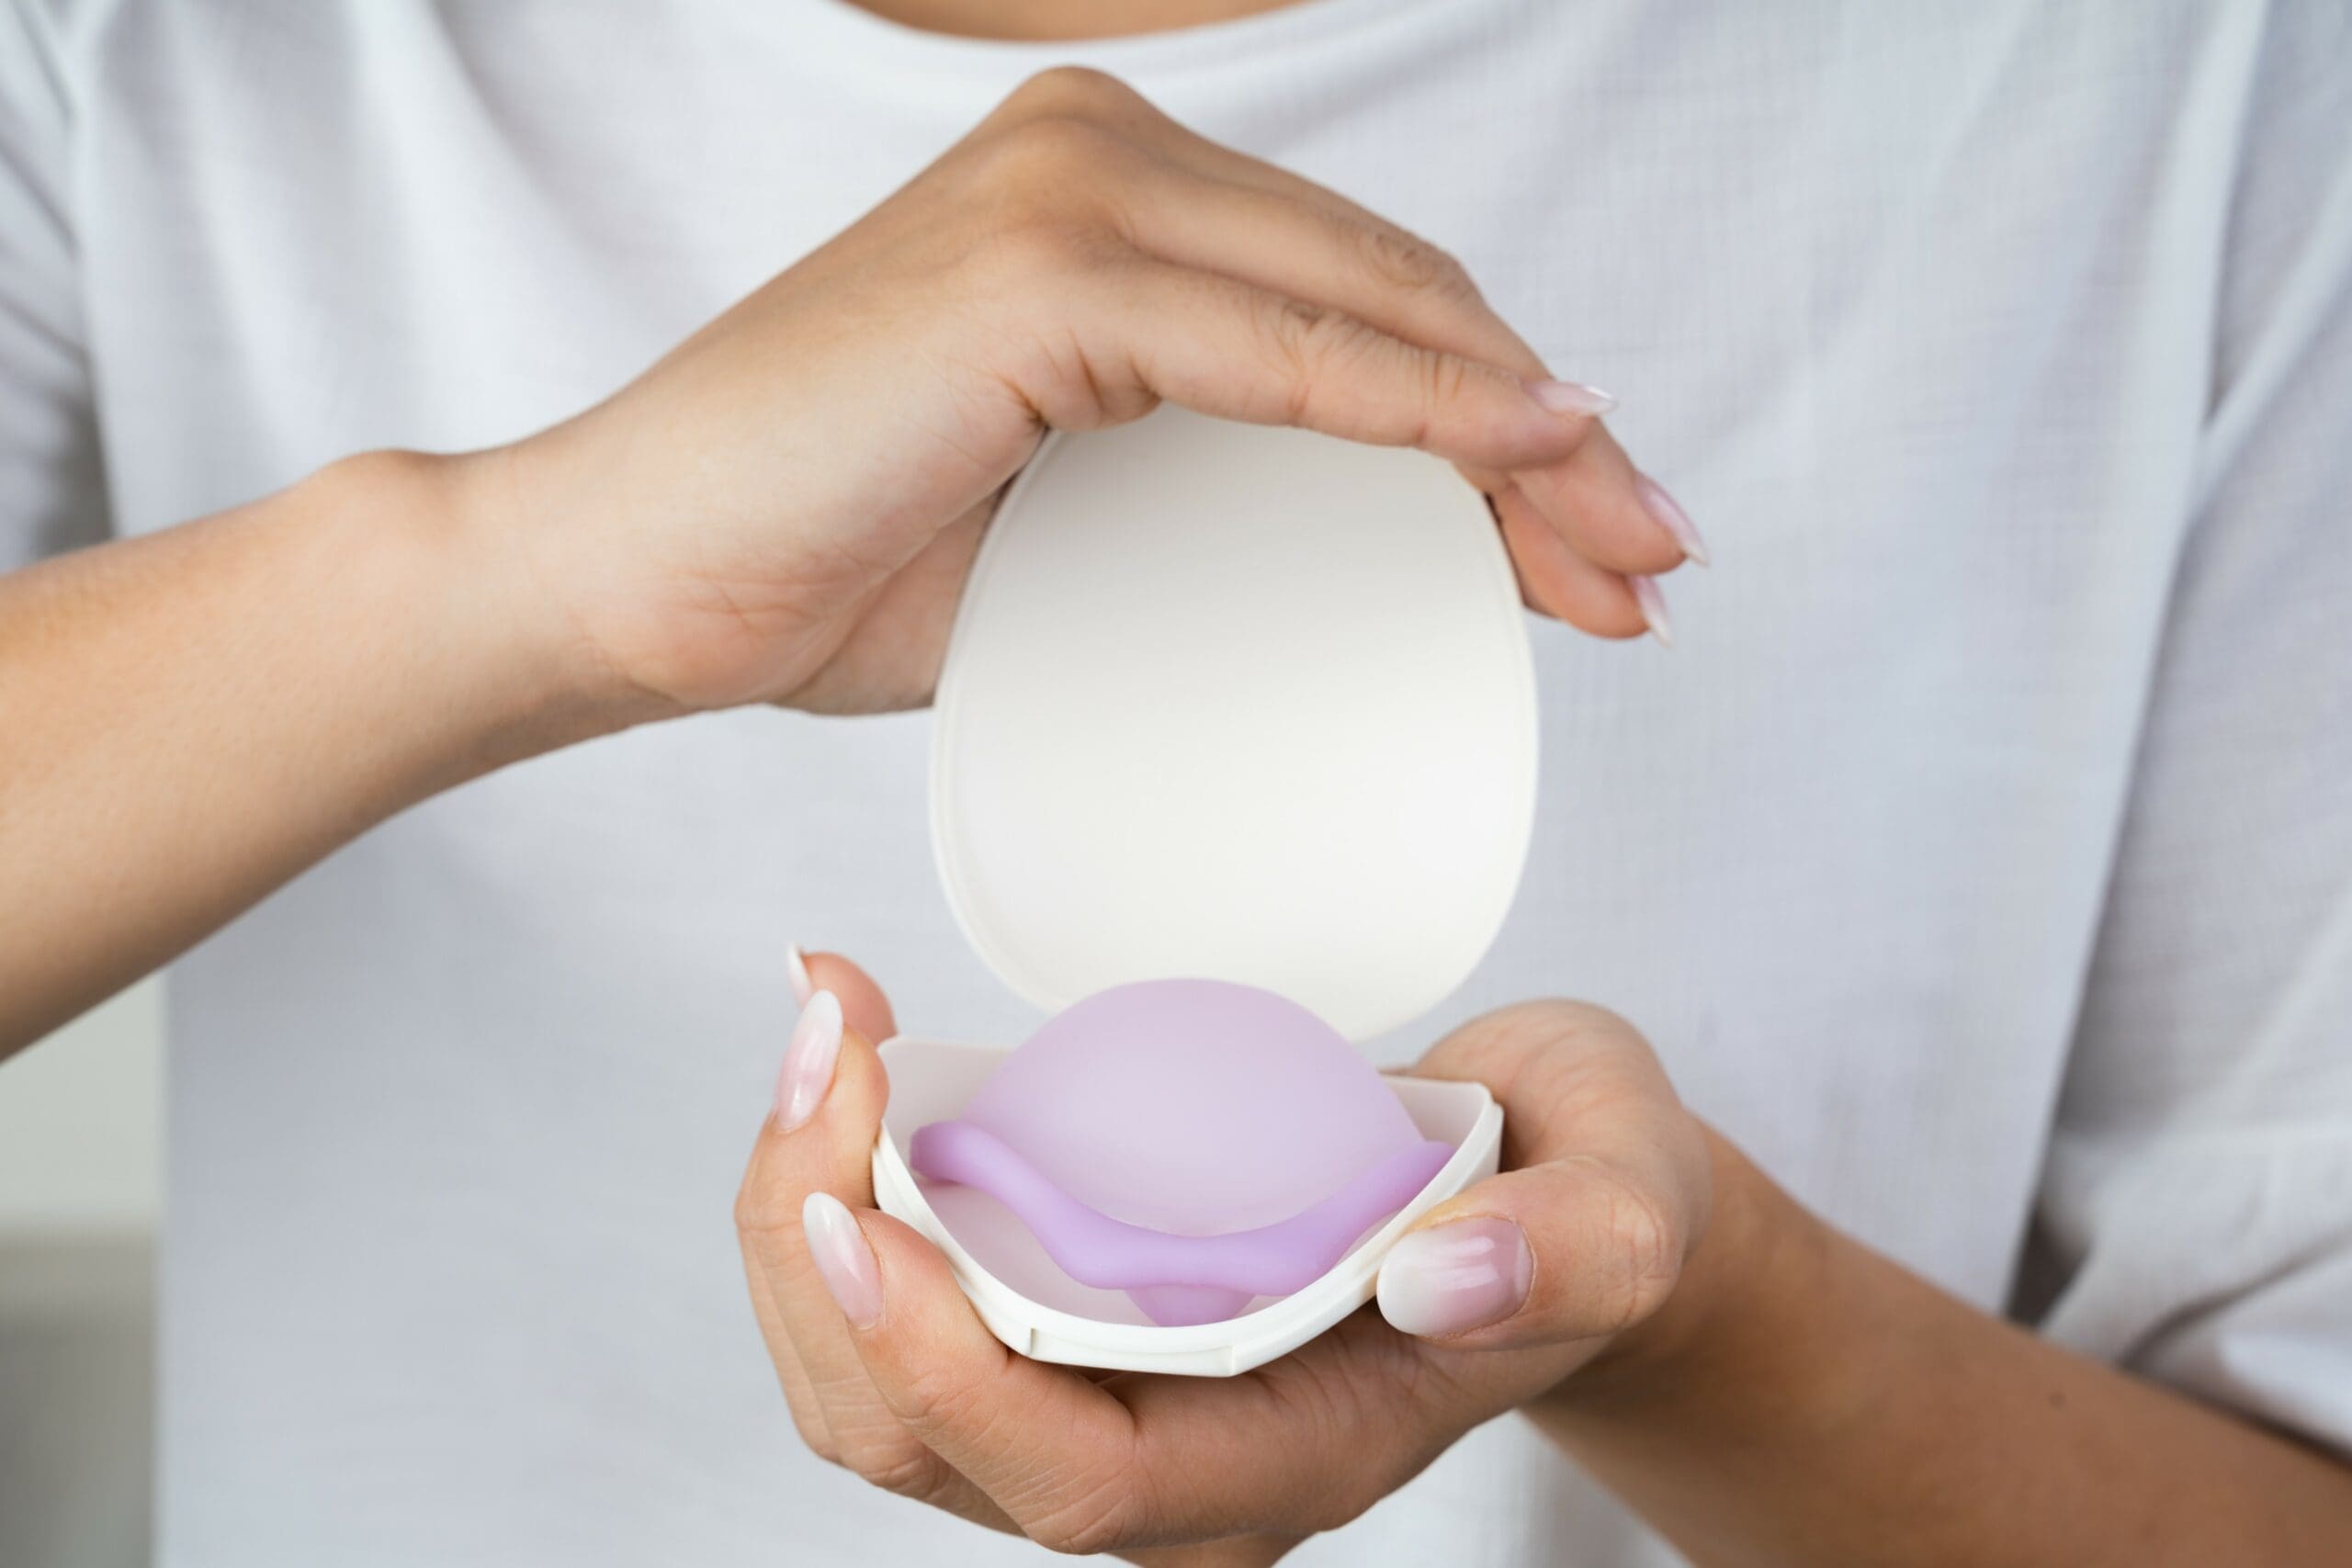 What is a diaphragm and how to use it for contraception